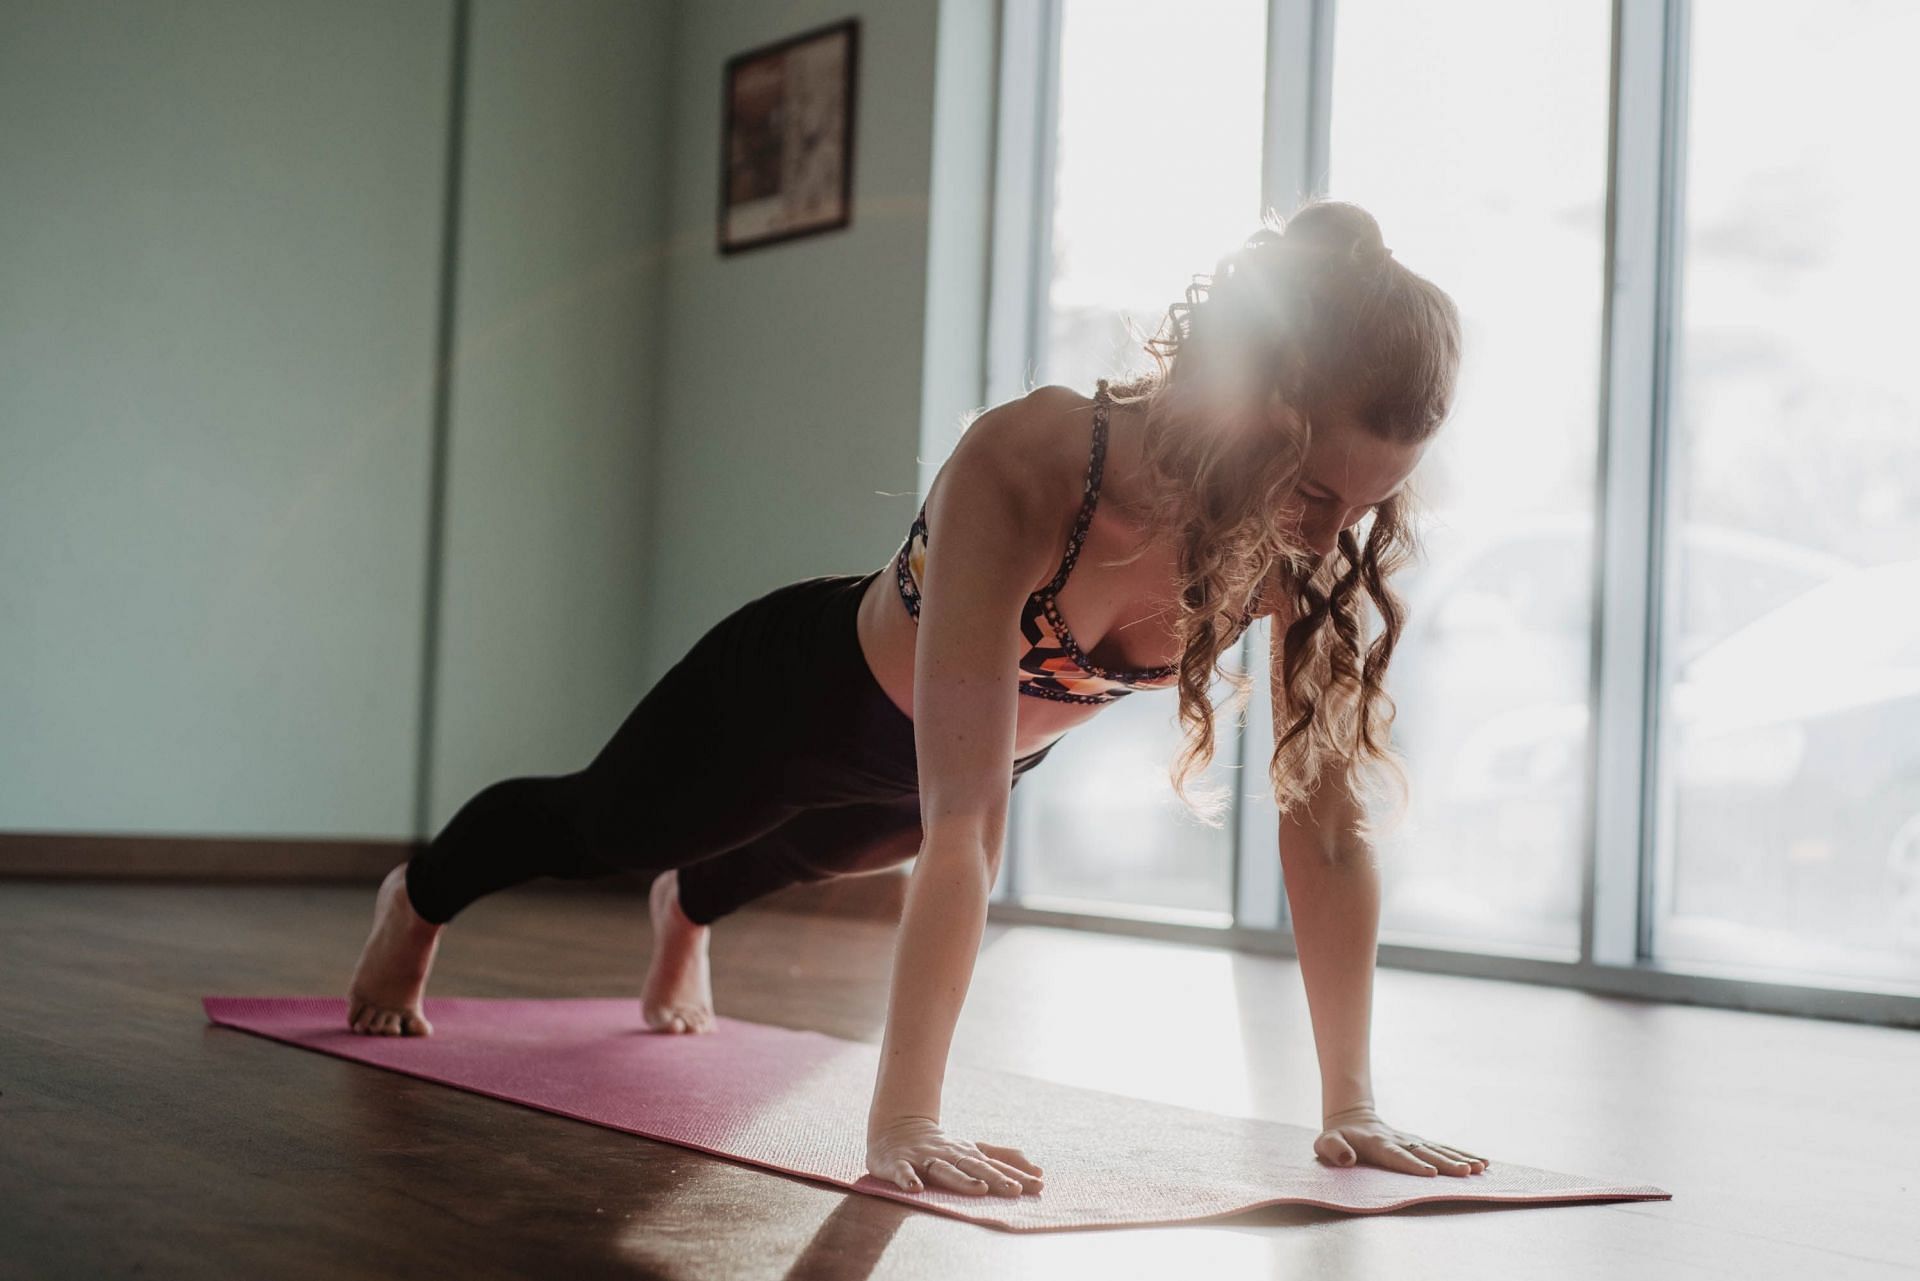 Planks are a great option to build a strong core! (Image via unsplash/Olivia Bauso)